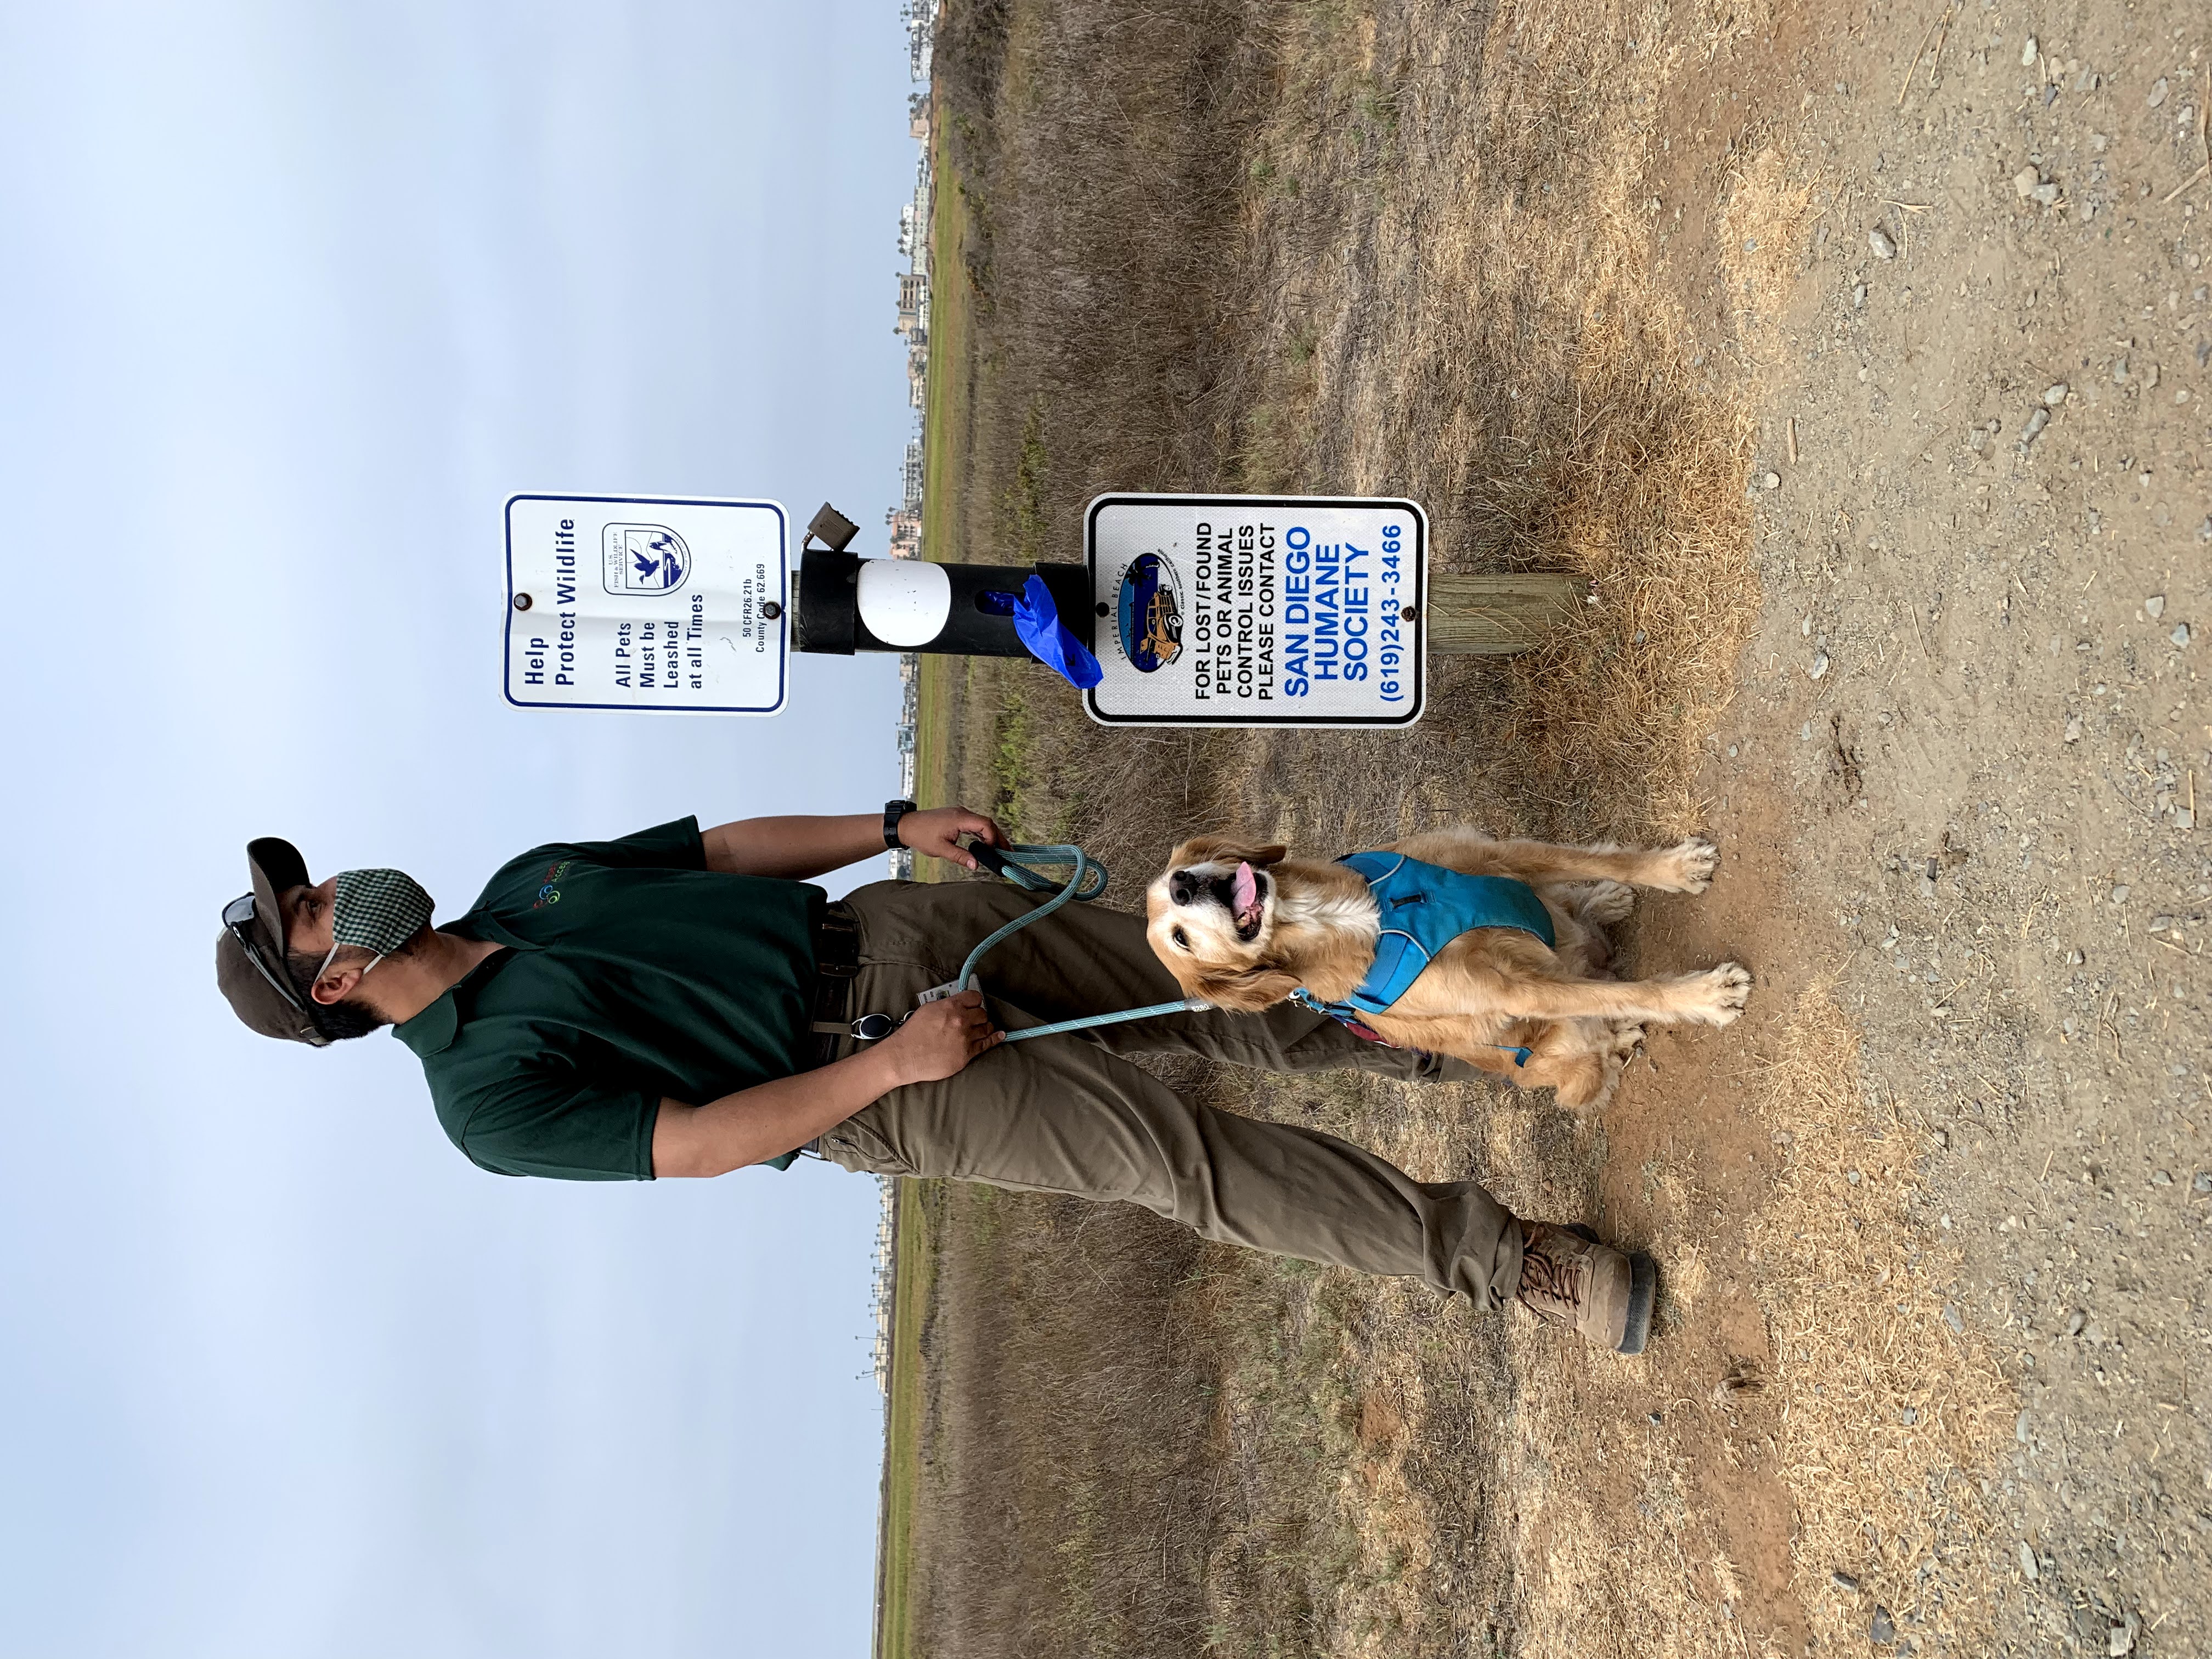 Individual wearing face mask with leashed dog near sign and waste bags.